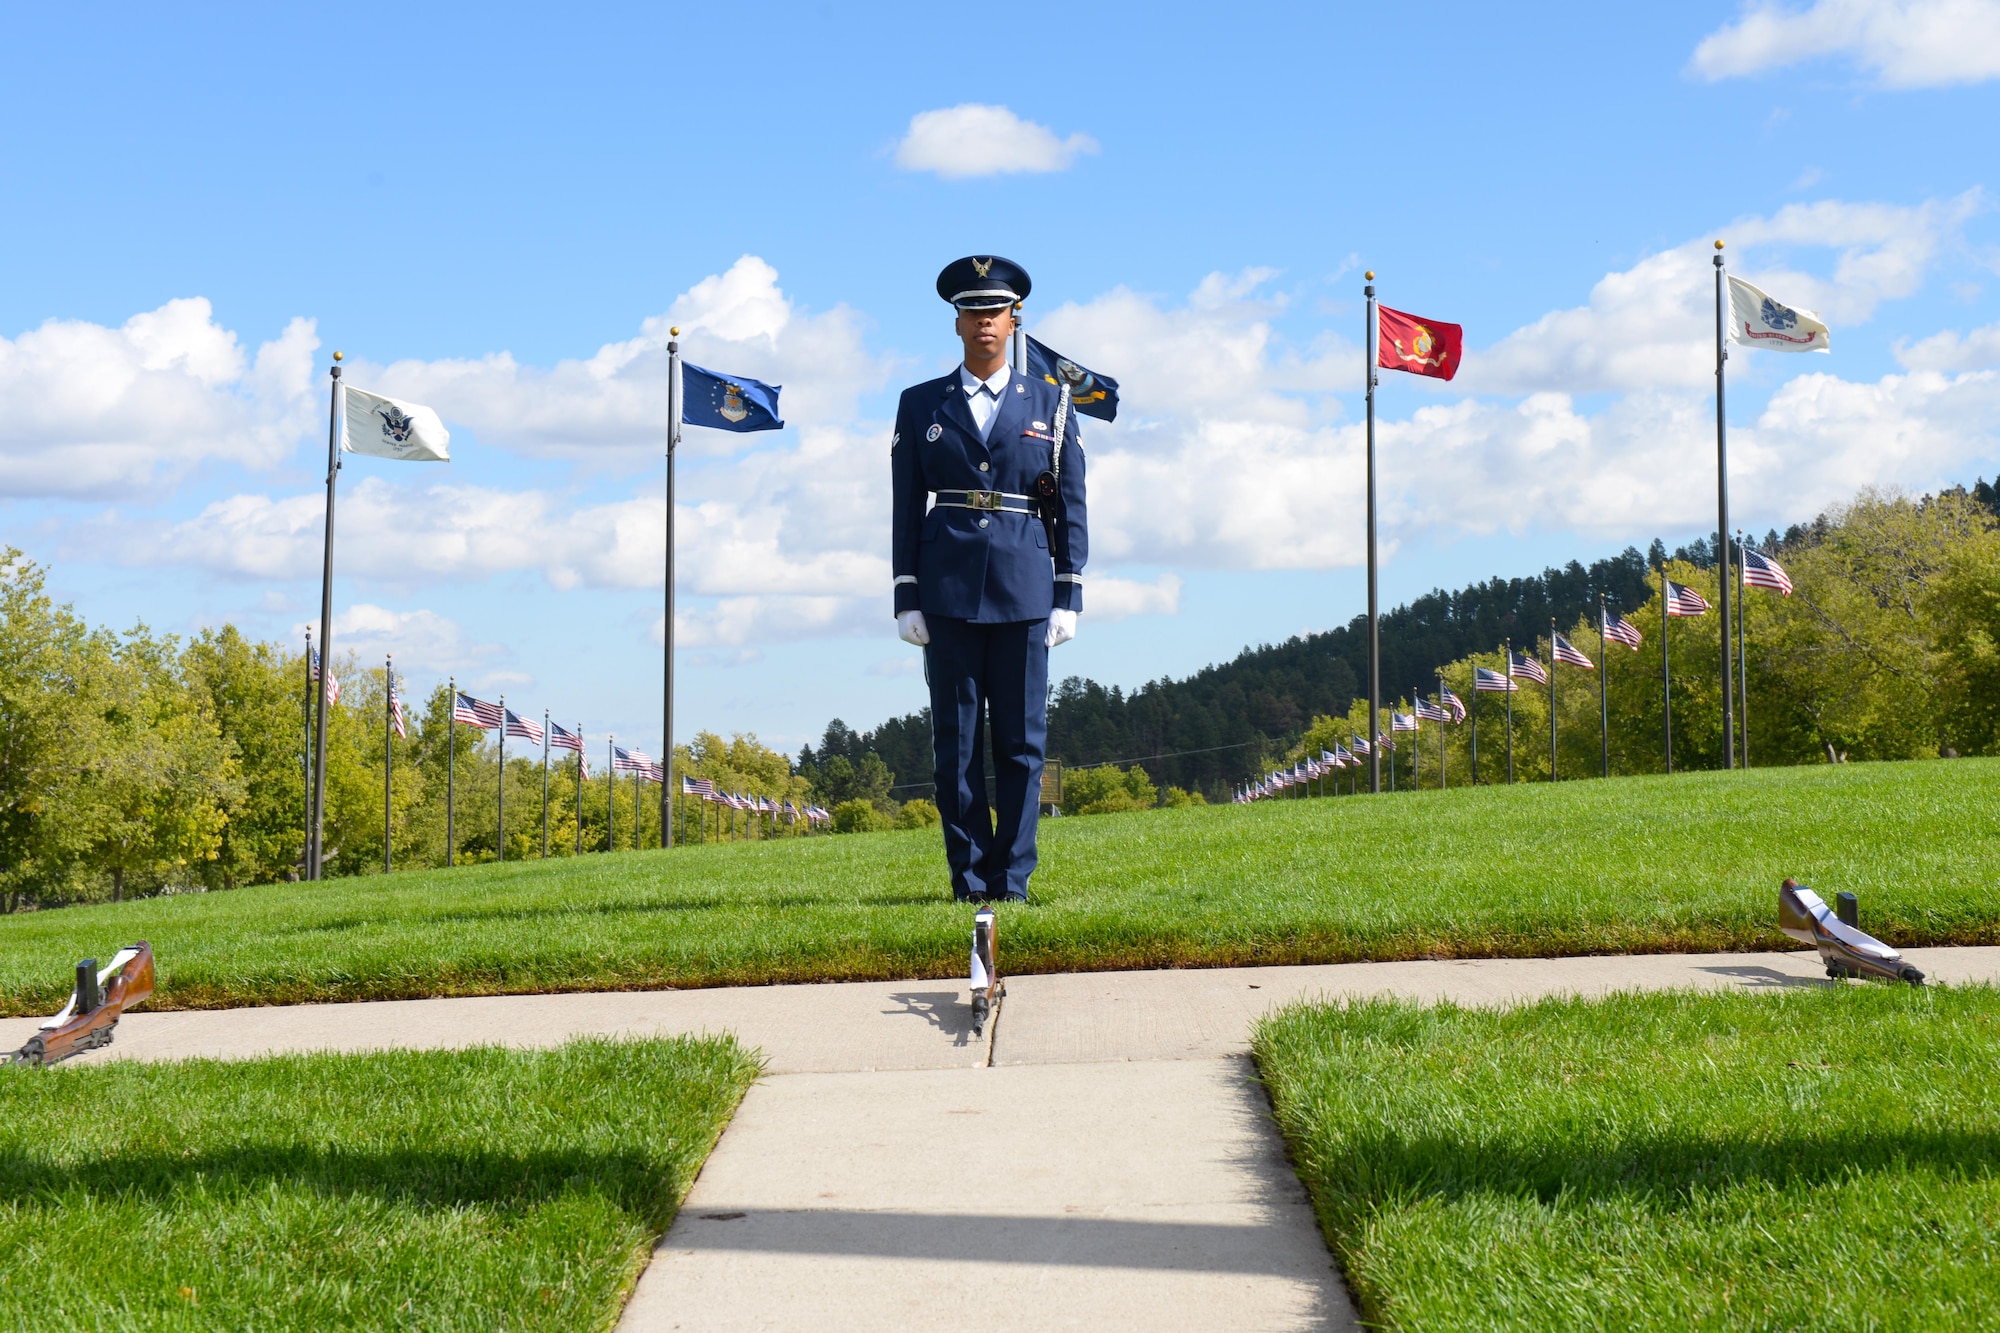 Airman 1st Class Genique Elliott, a heavy equipment operator assigned to the 28th Civil Engineer Squadron, waits for the firing party to arrive to render military honors during a funeral at Black Hills National Cemetery in Sturgis, S.D., Sept. 26, 2017. Each of the funeral detail’s sequences are planned out before the actual ceremony, which include specific positions acting as for different events. (U.S. Air Force photo by Airman Nicolas Z. Erwin)